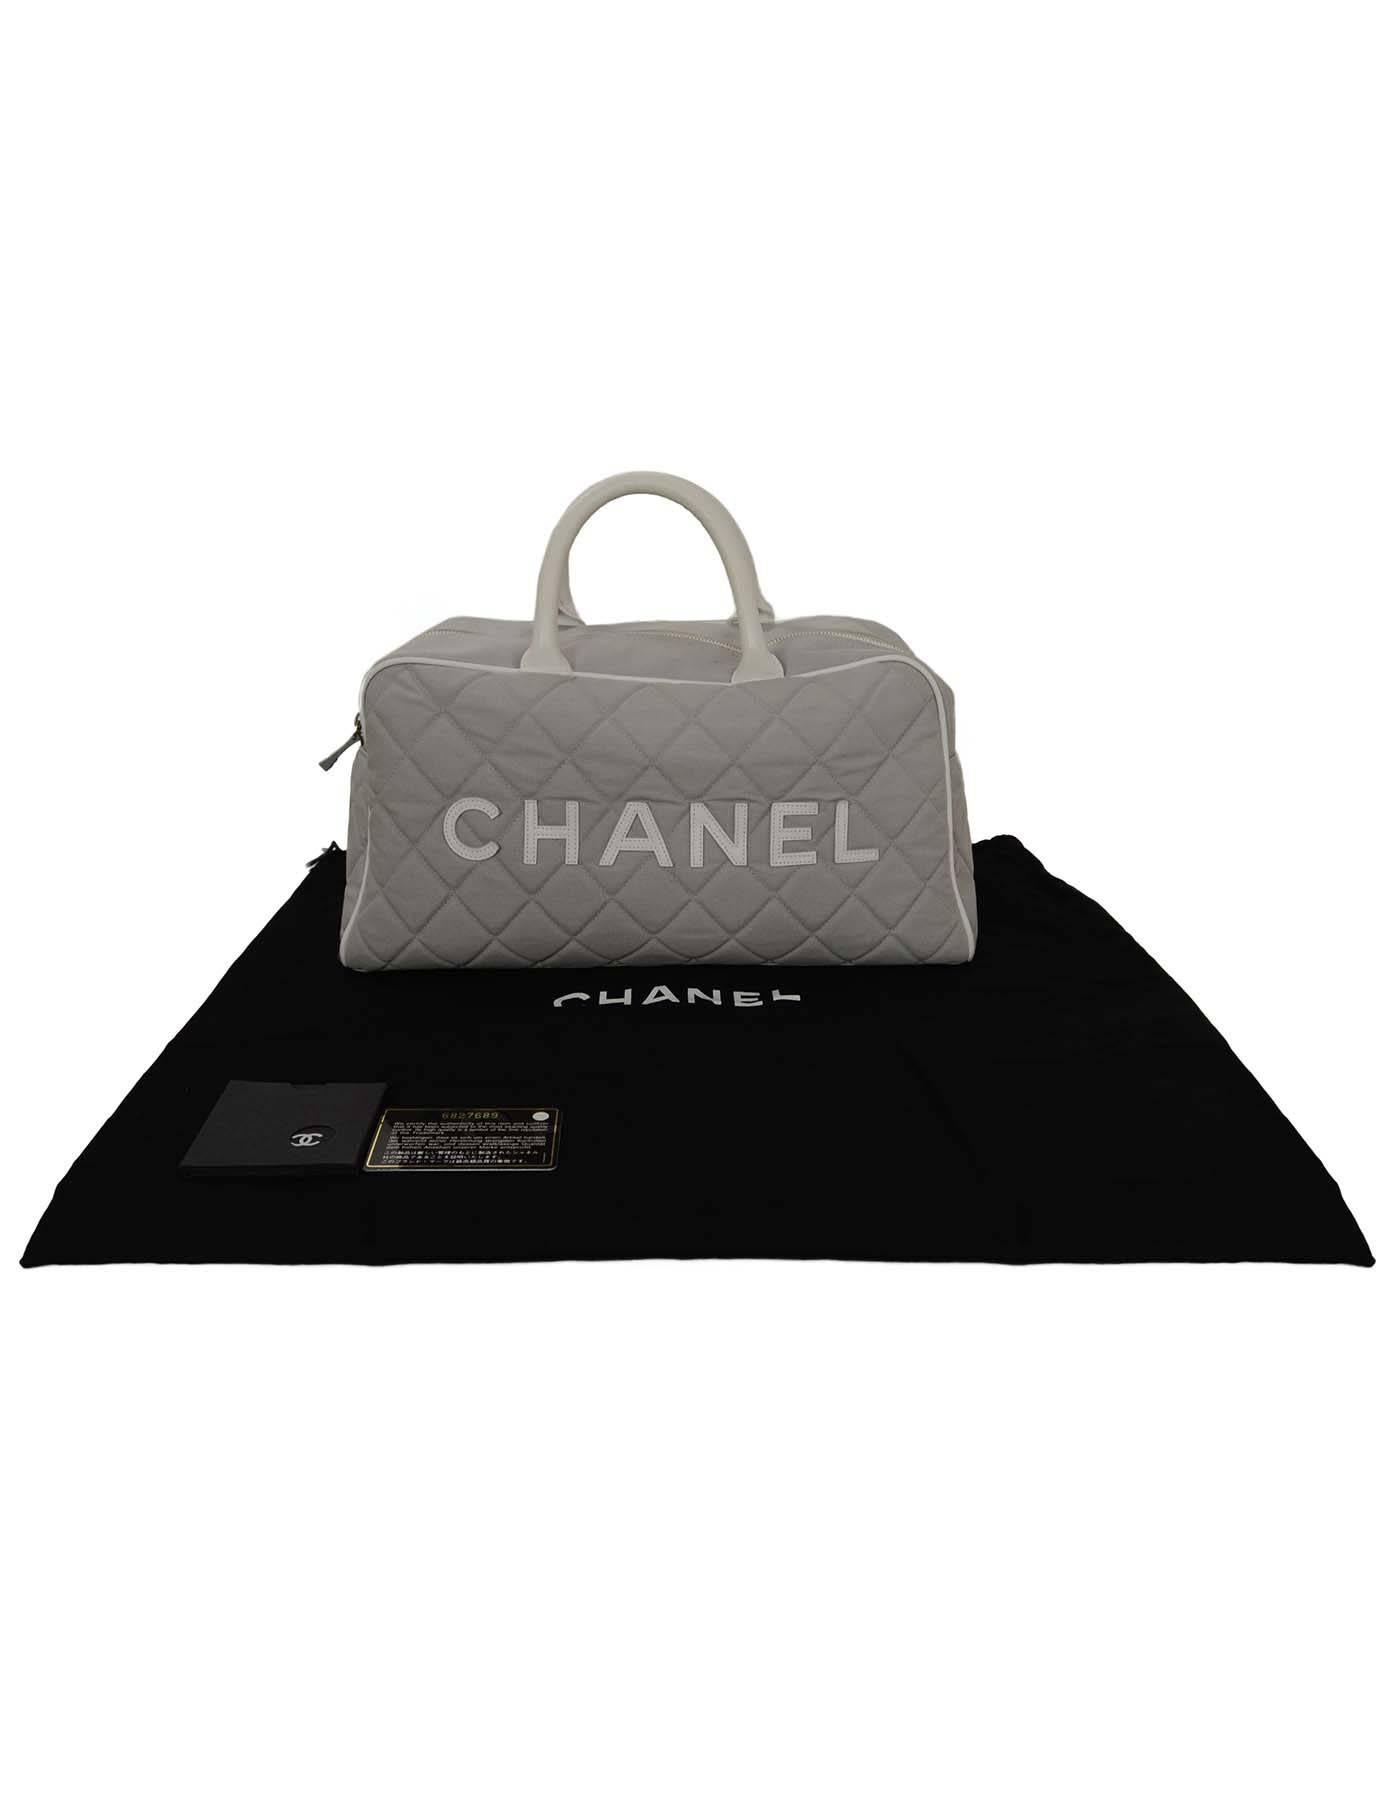 Chanel Grey Quilted Canvas Bowler Bag SHW 1